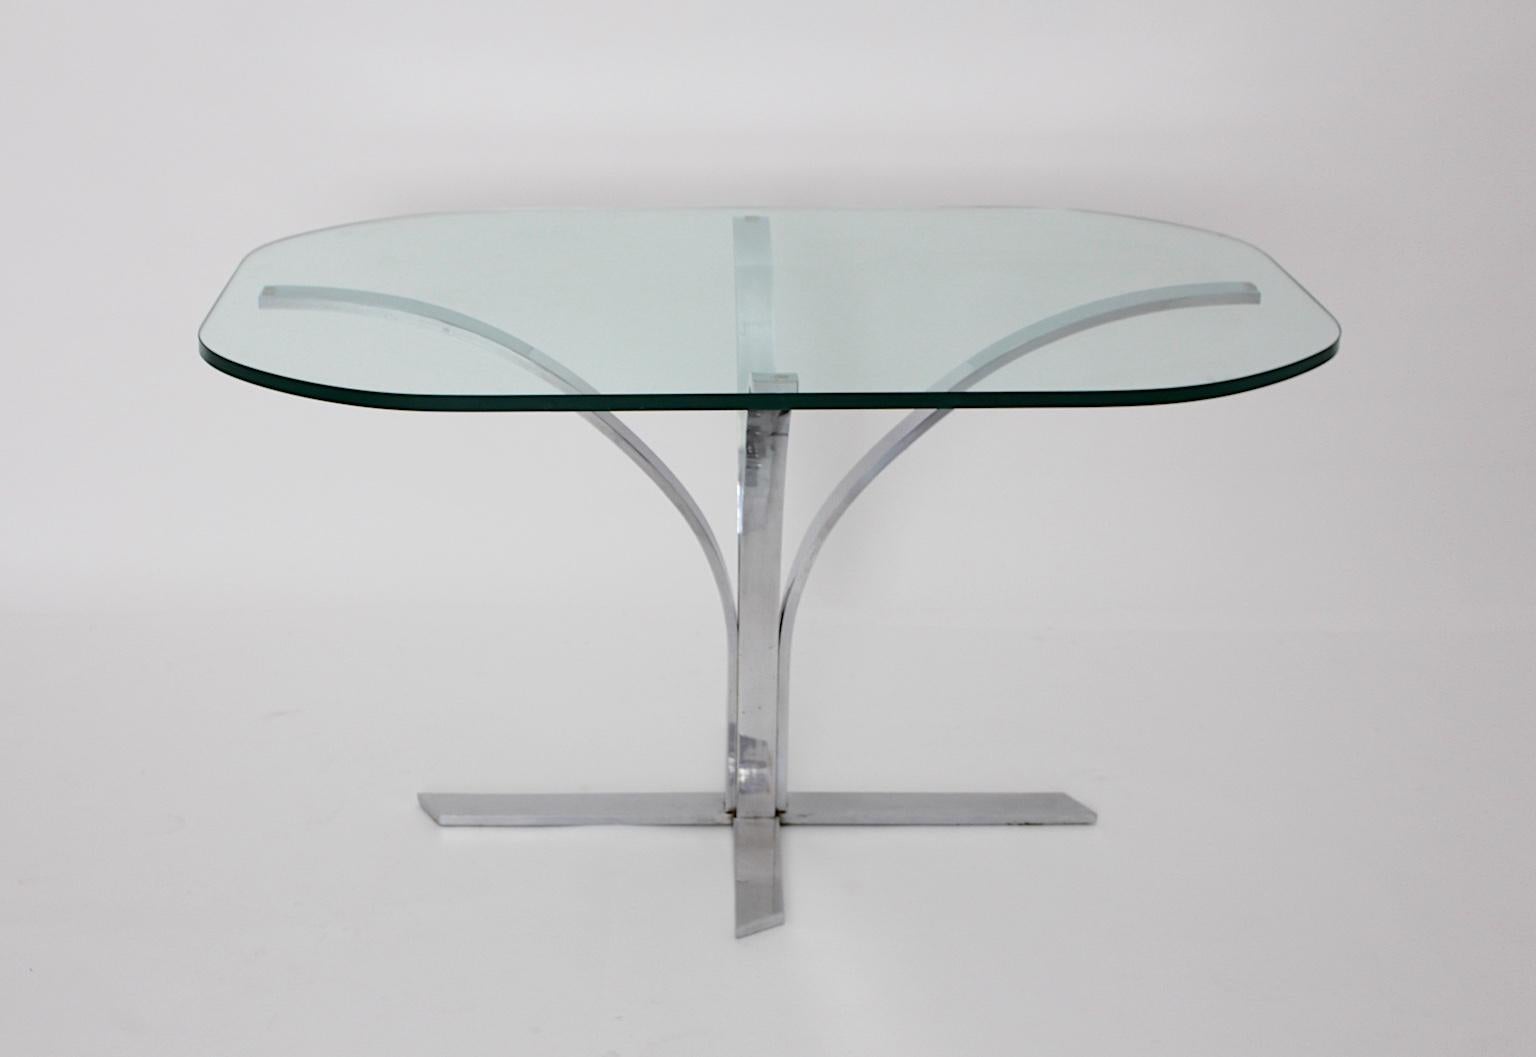 Space Age Chromed Metal Vintage Dining Table or Writing Table, 1960s, Germany For Sale 2